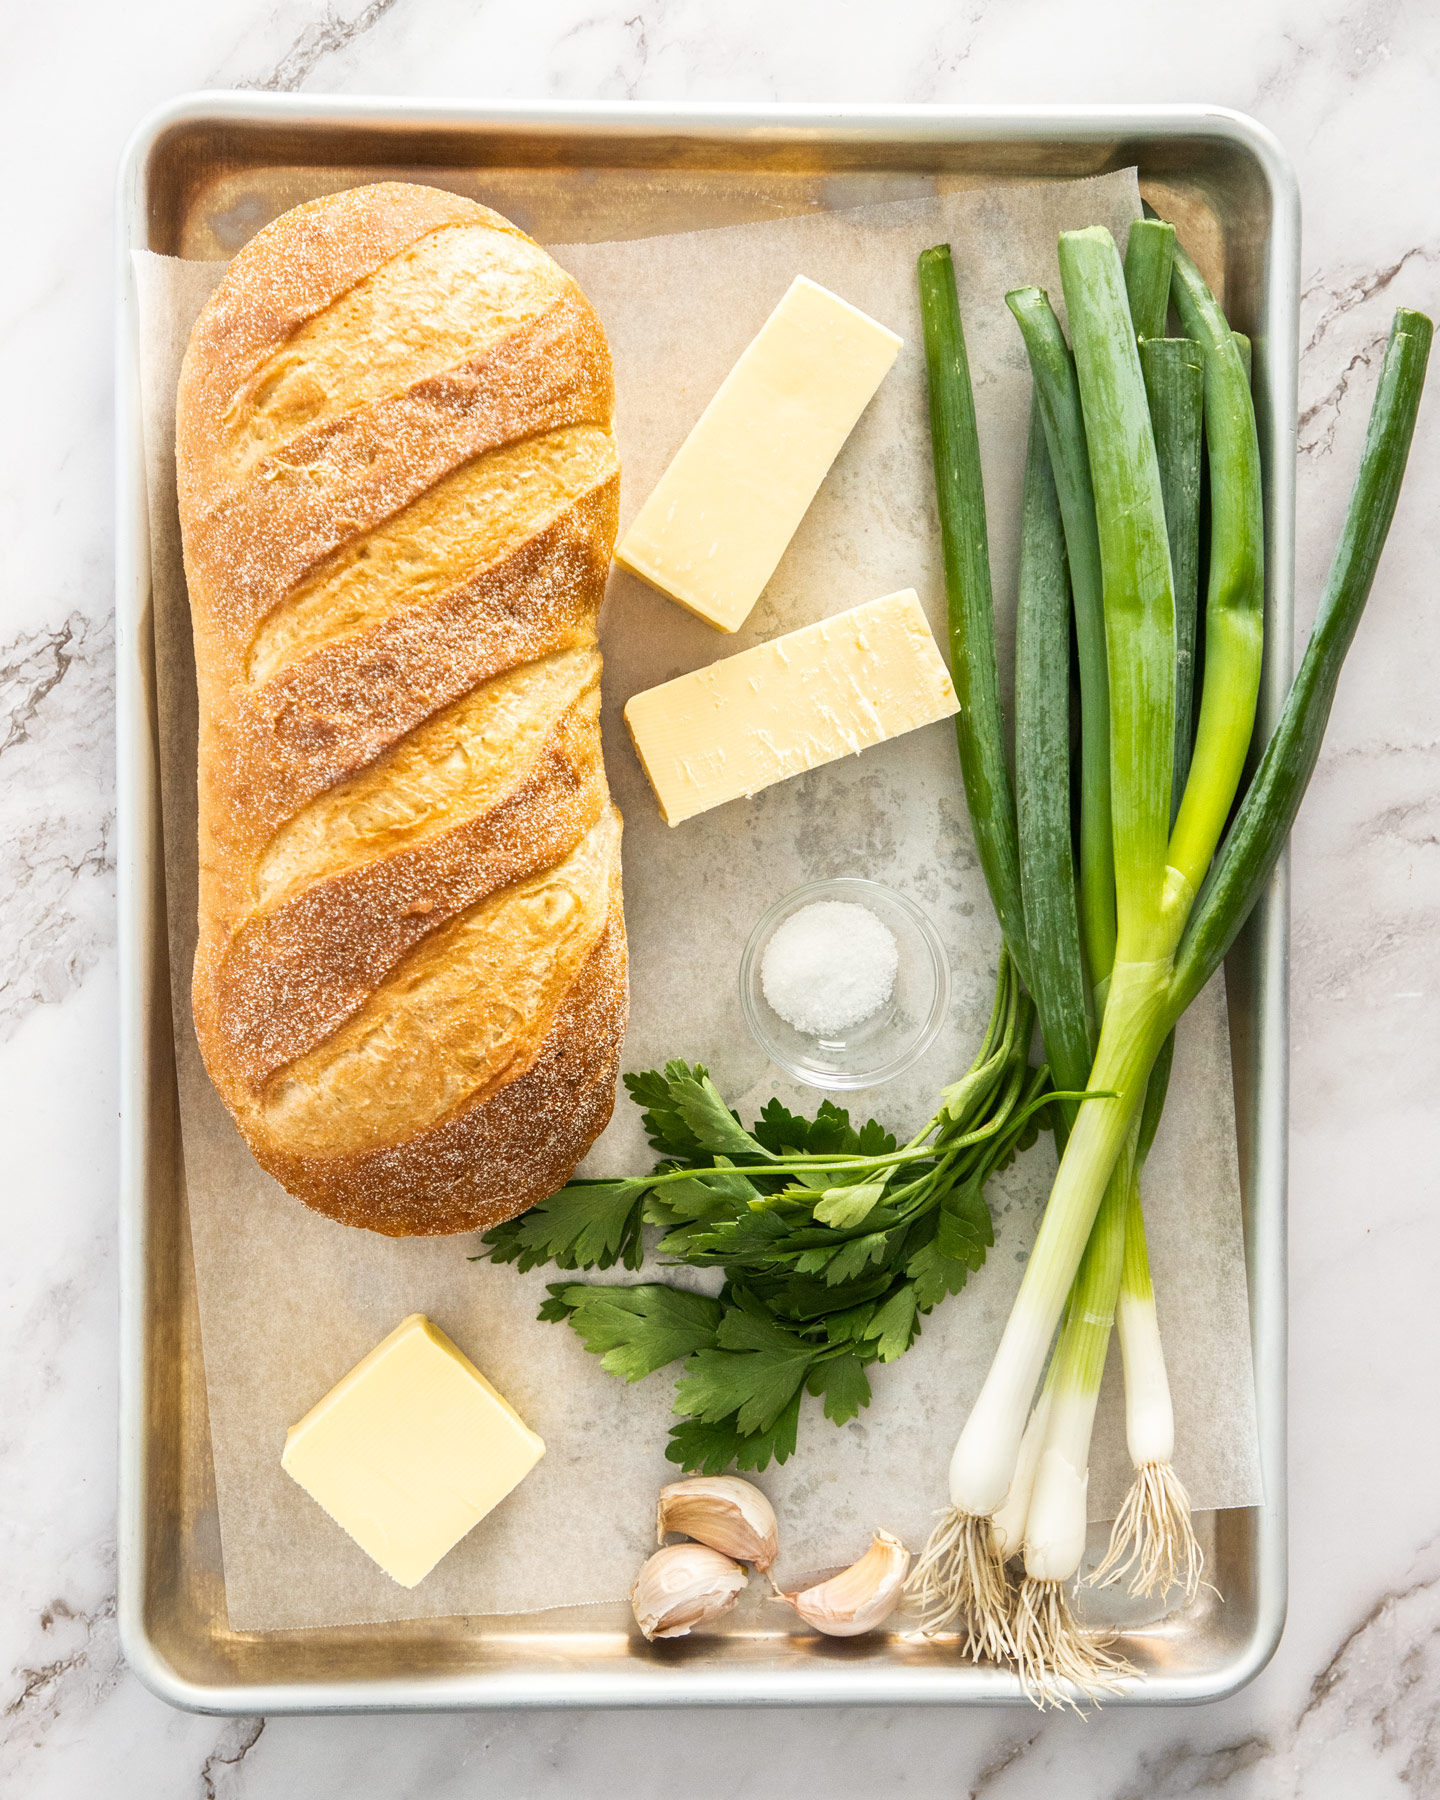 Ingredients for cheese and garlic crack bread on a baking tray.